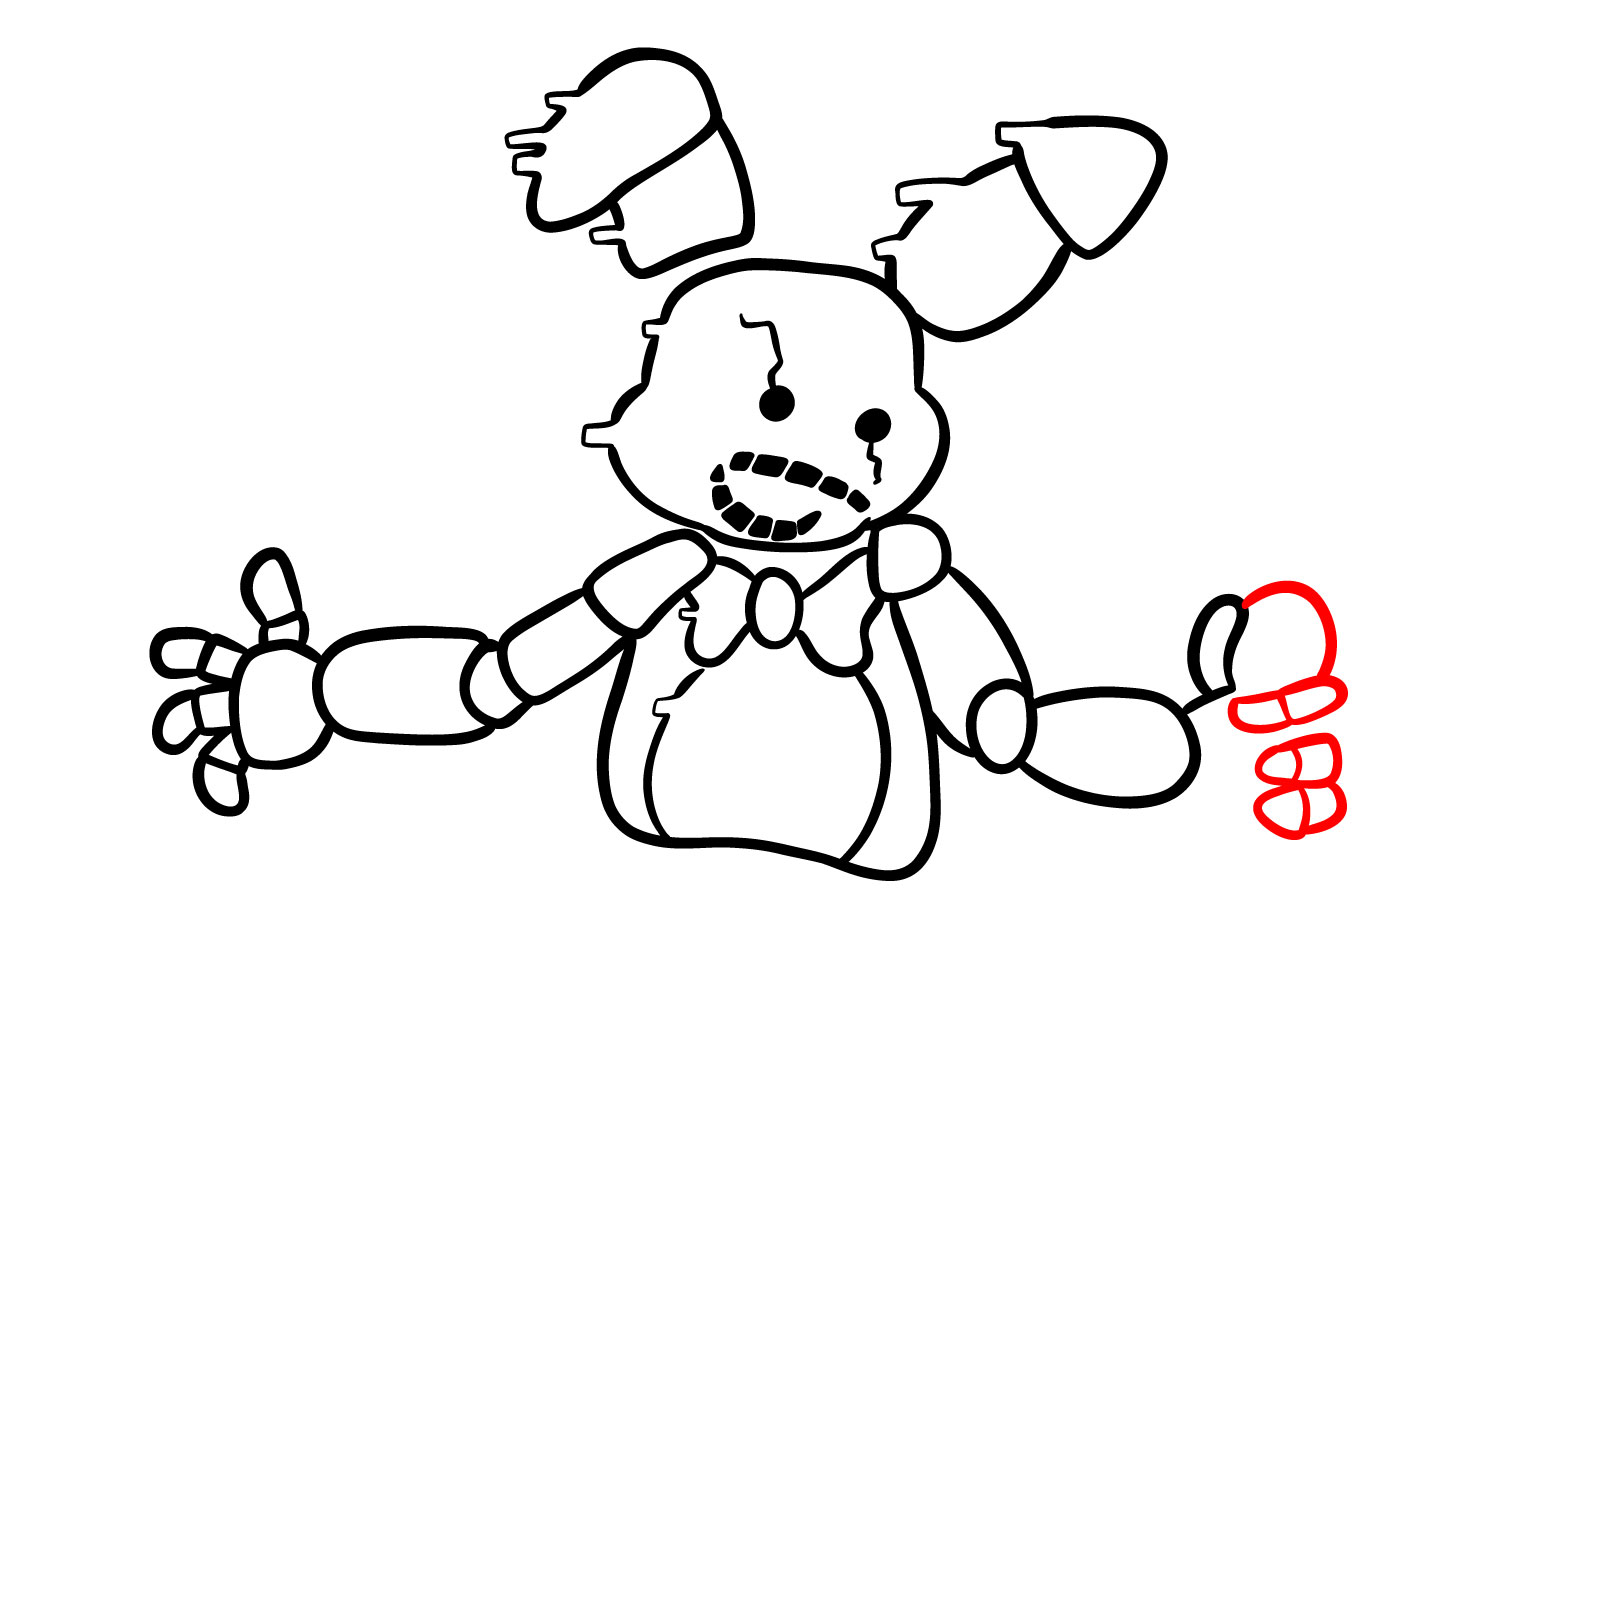 How to draw Shadow Bonnie from FNF: Glitched Legends - step 23